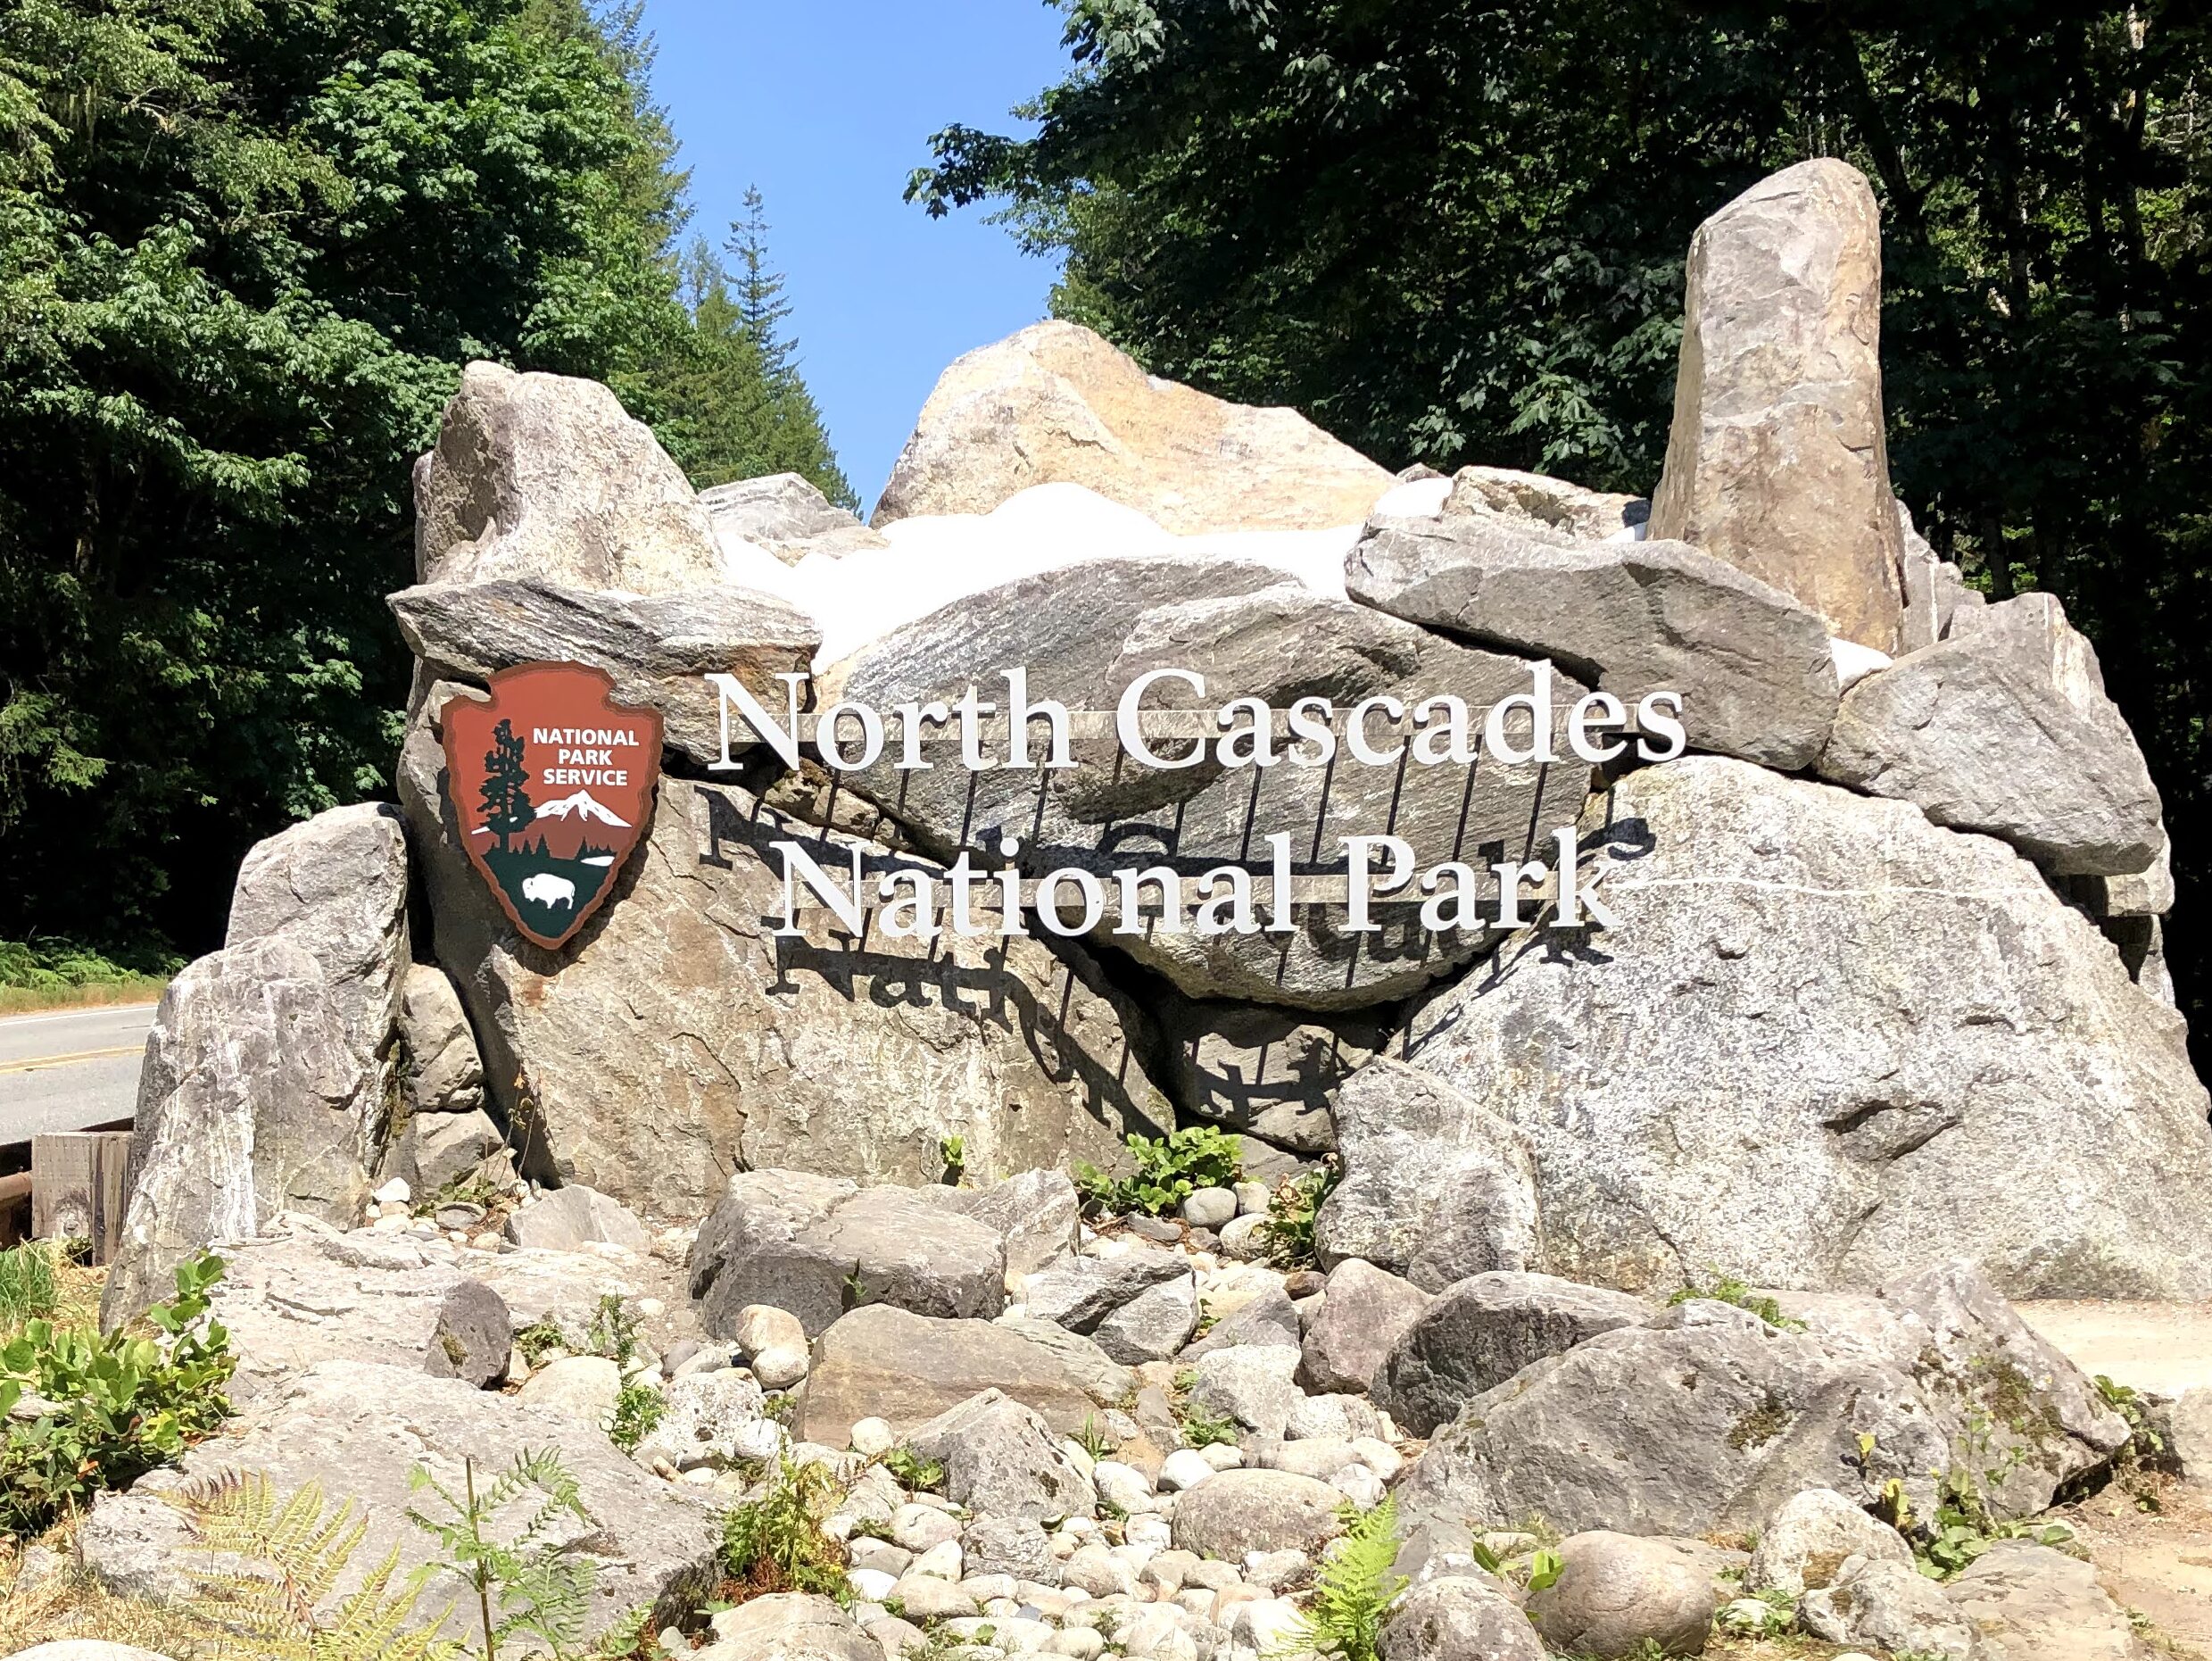 Photo of an entrance sign that reads "North Cascades National Park" with rocks in the background.